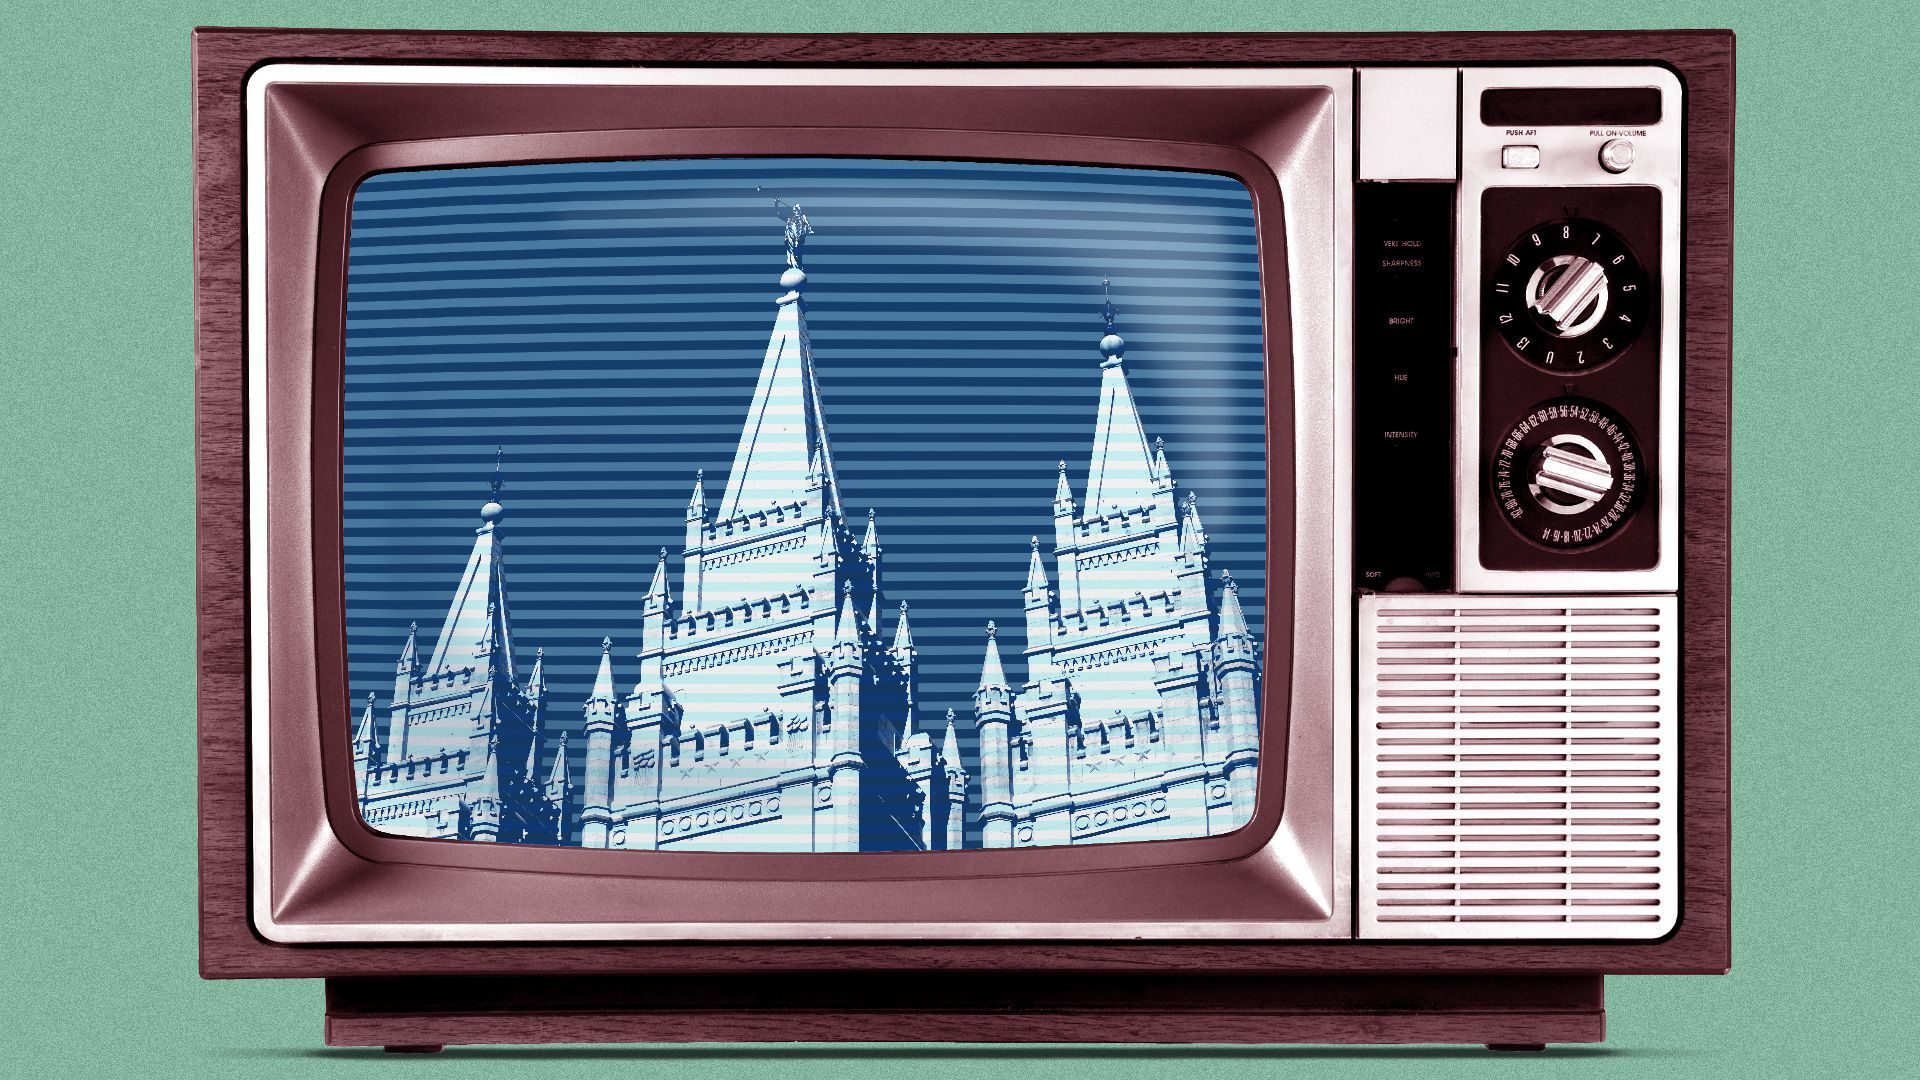 Illustration of a TV with the Salt Lake City Temple on the screen.